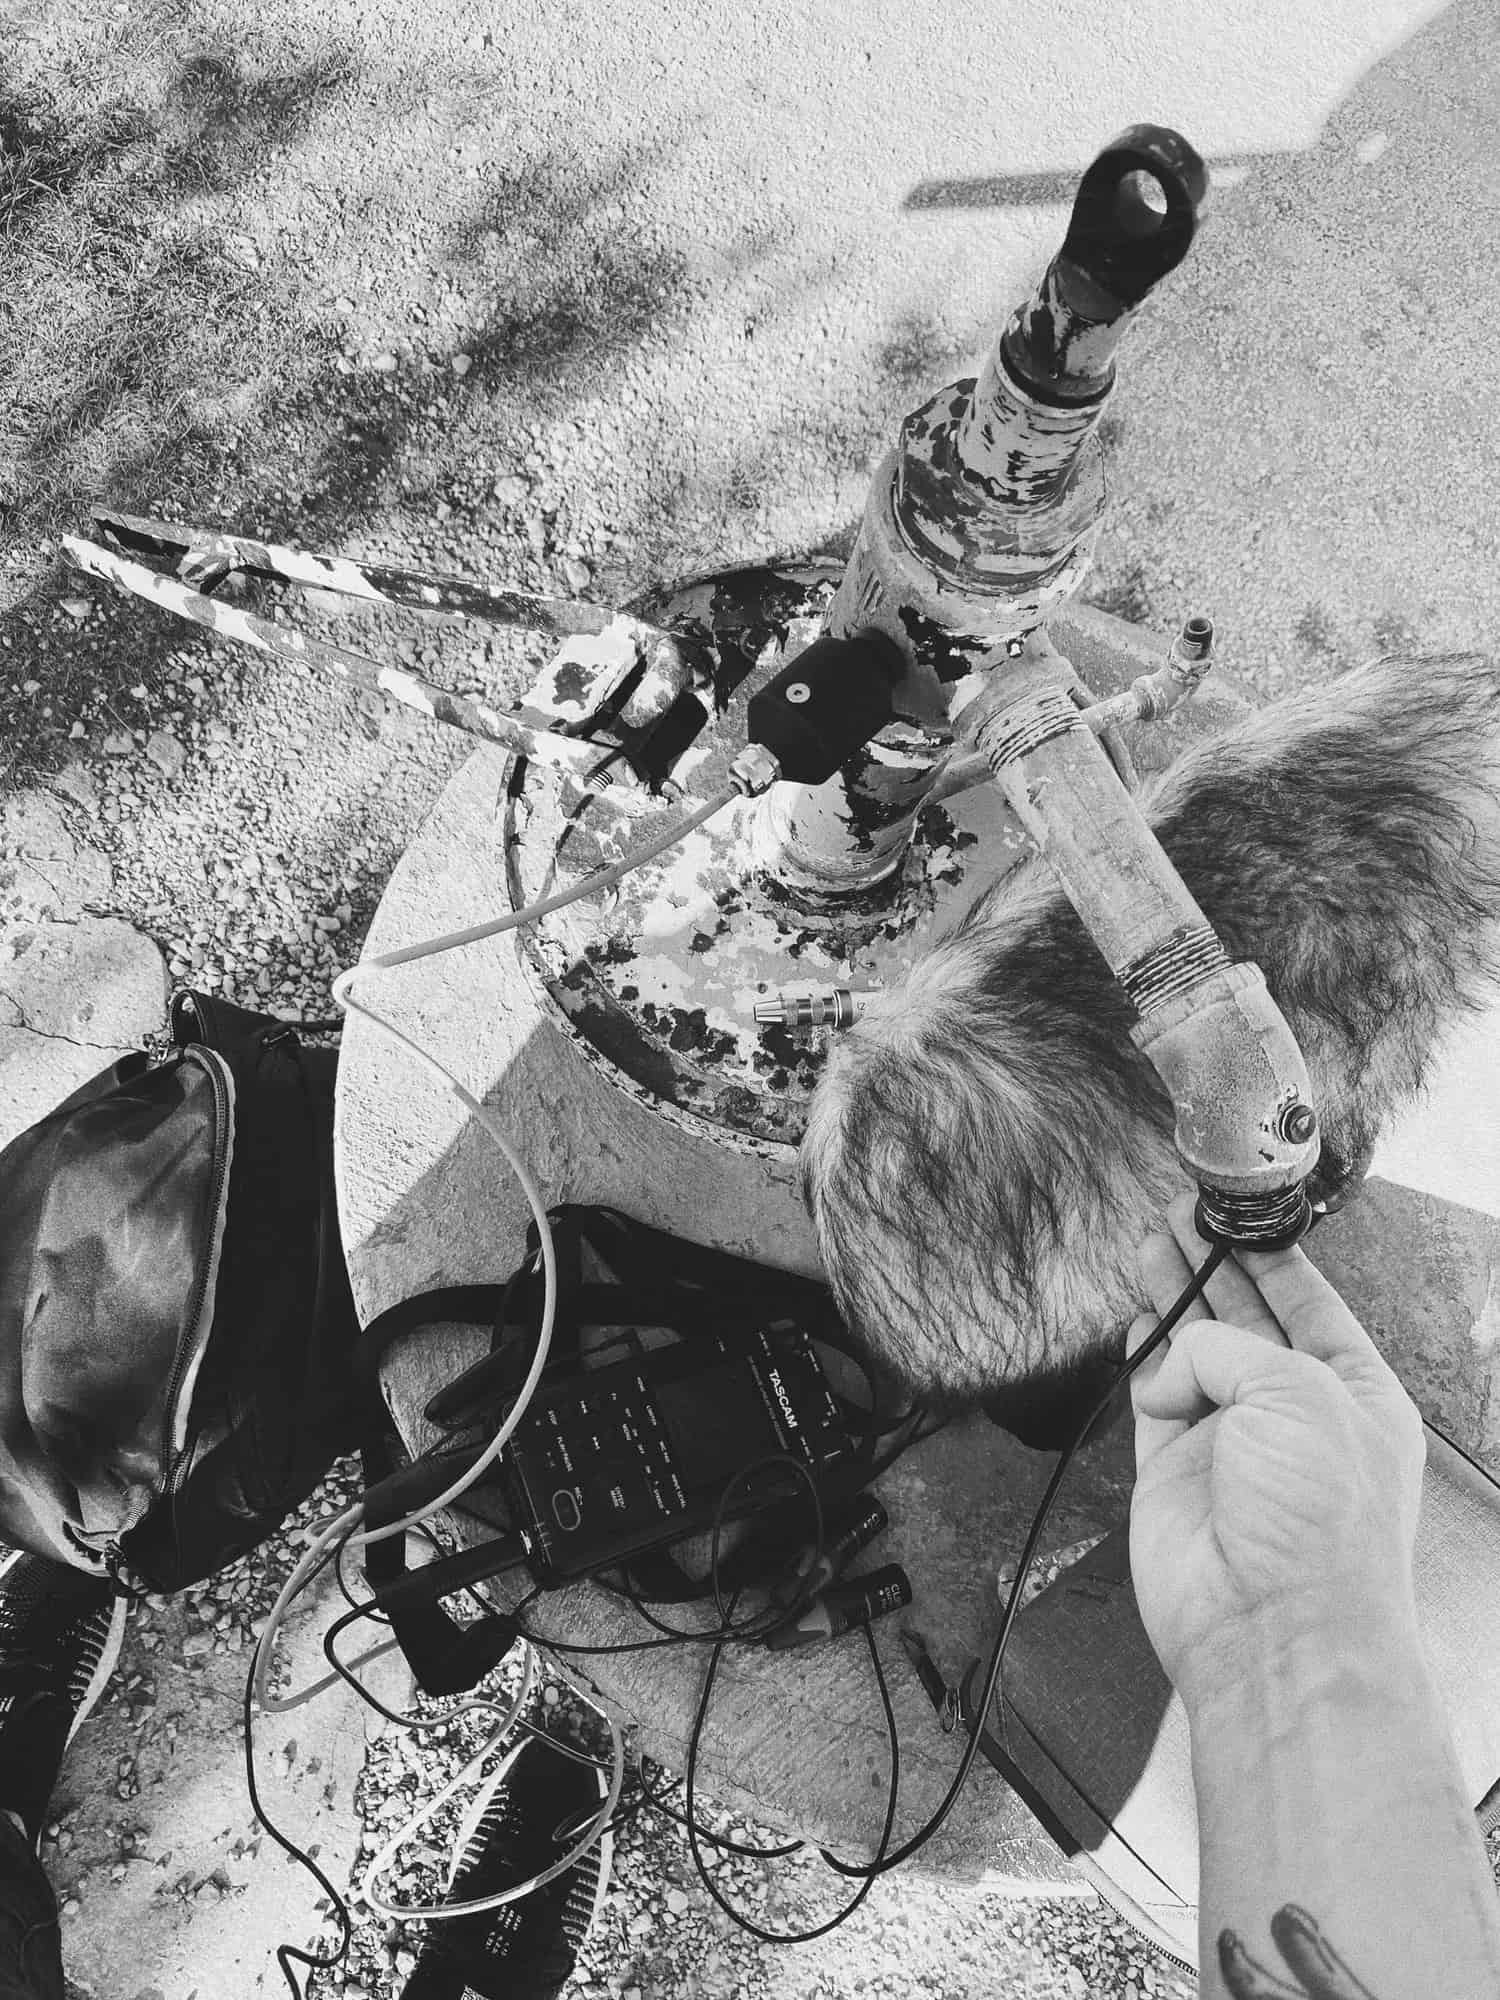 Black and white photograph of a hand holding a contact microphone against an old rusted water pump.